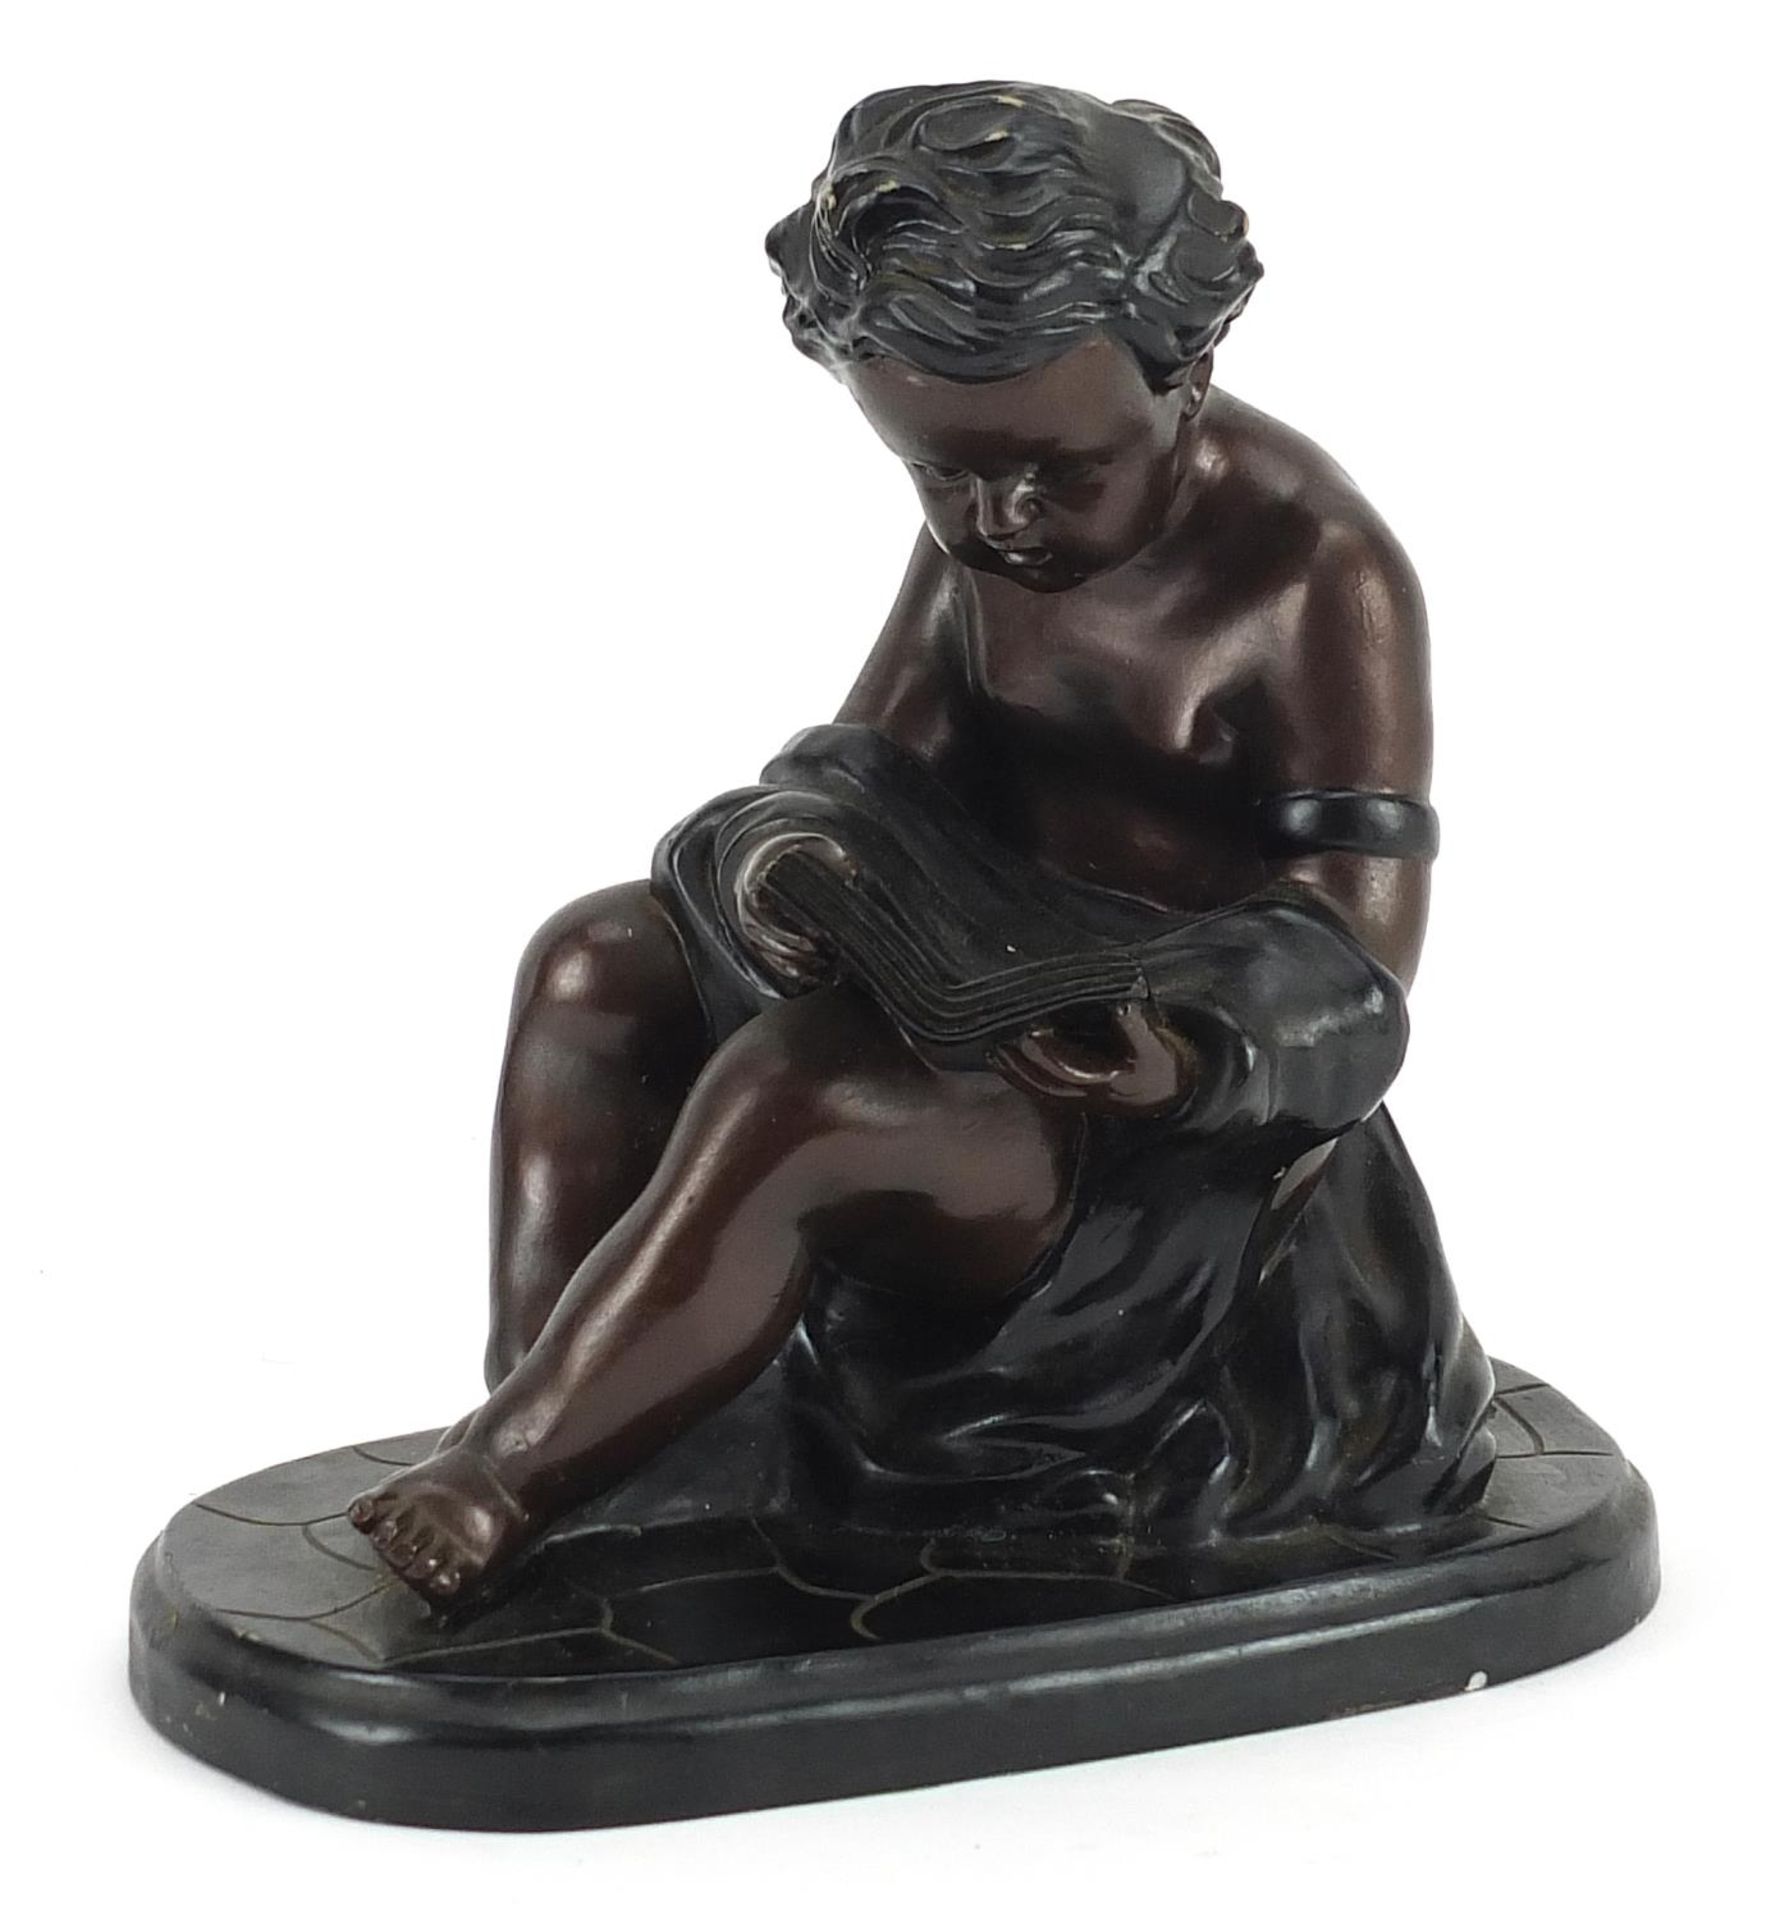 Bronzed figure of a young child reading a book, 17.5cm high